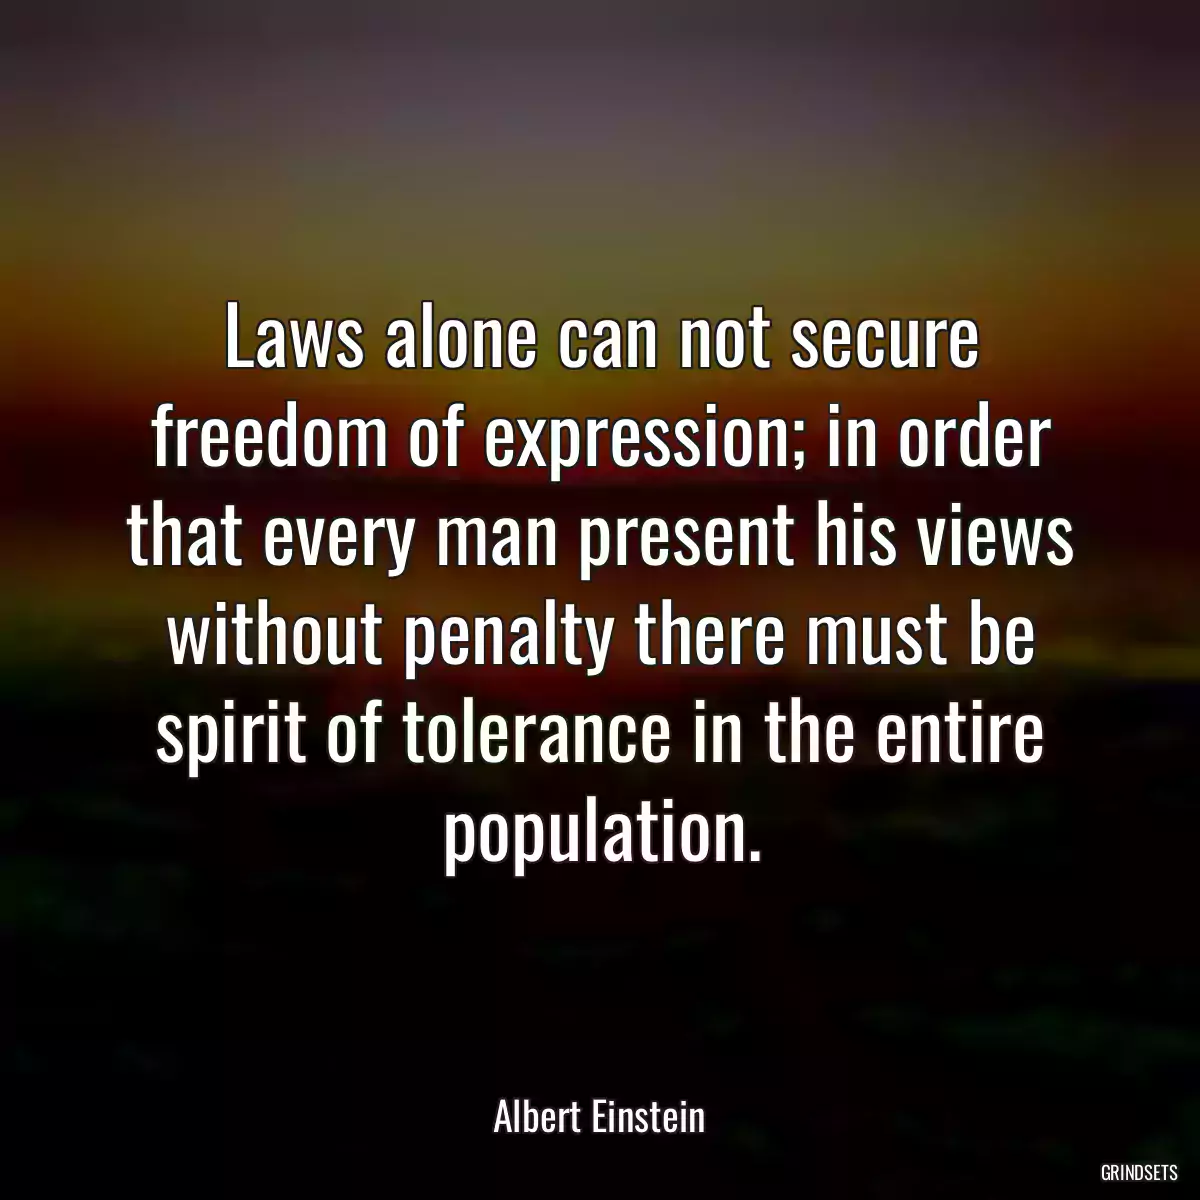 Laws alone can not secure freedom of expression; in order that every man present his views without penalty there must be spirit of tolerance in the entire population.